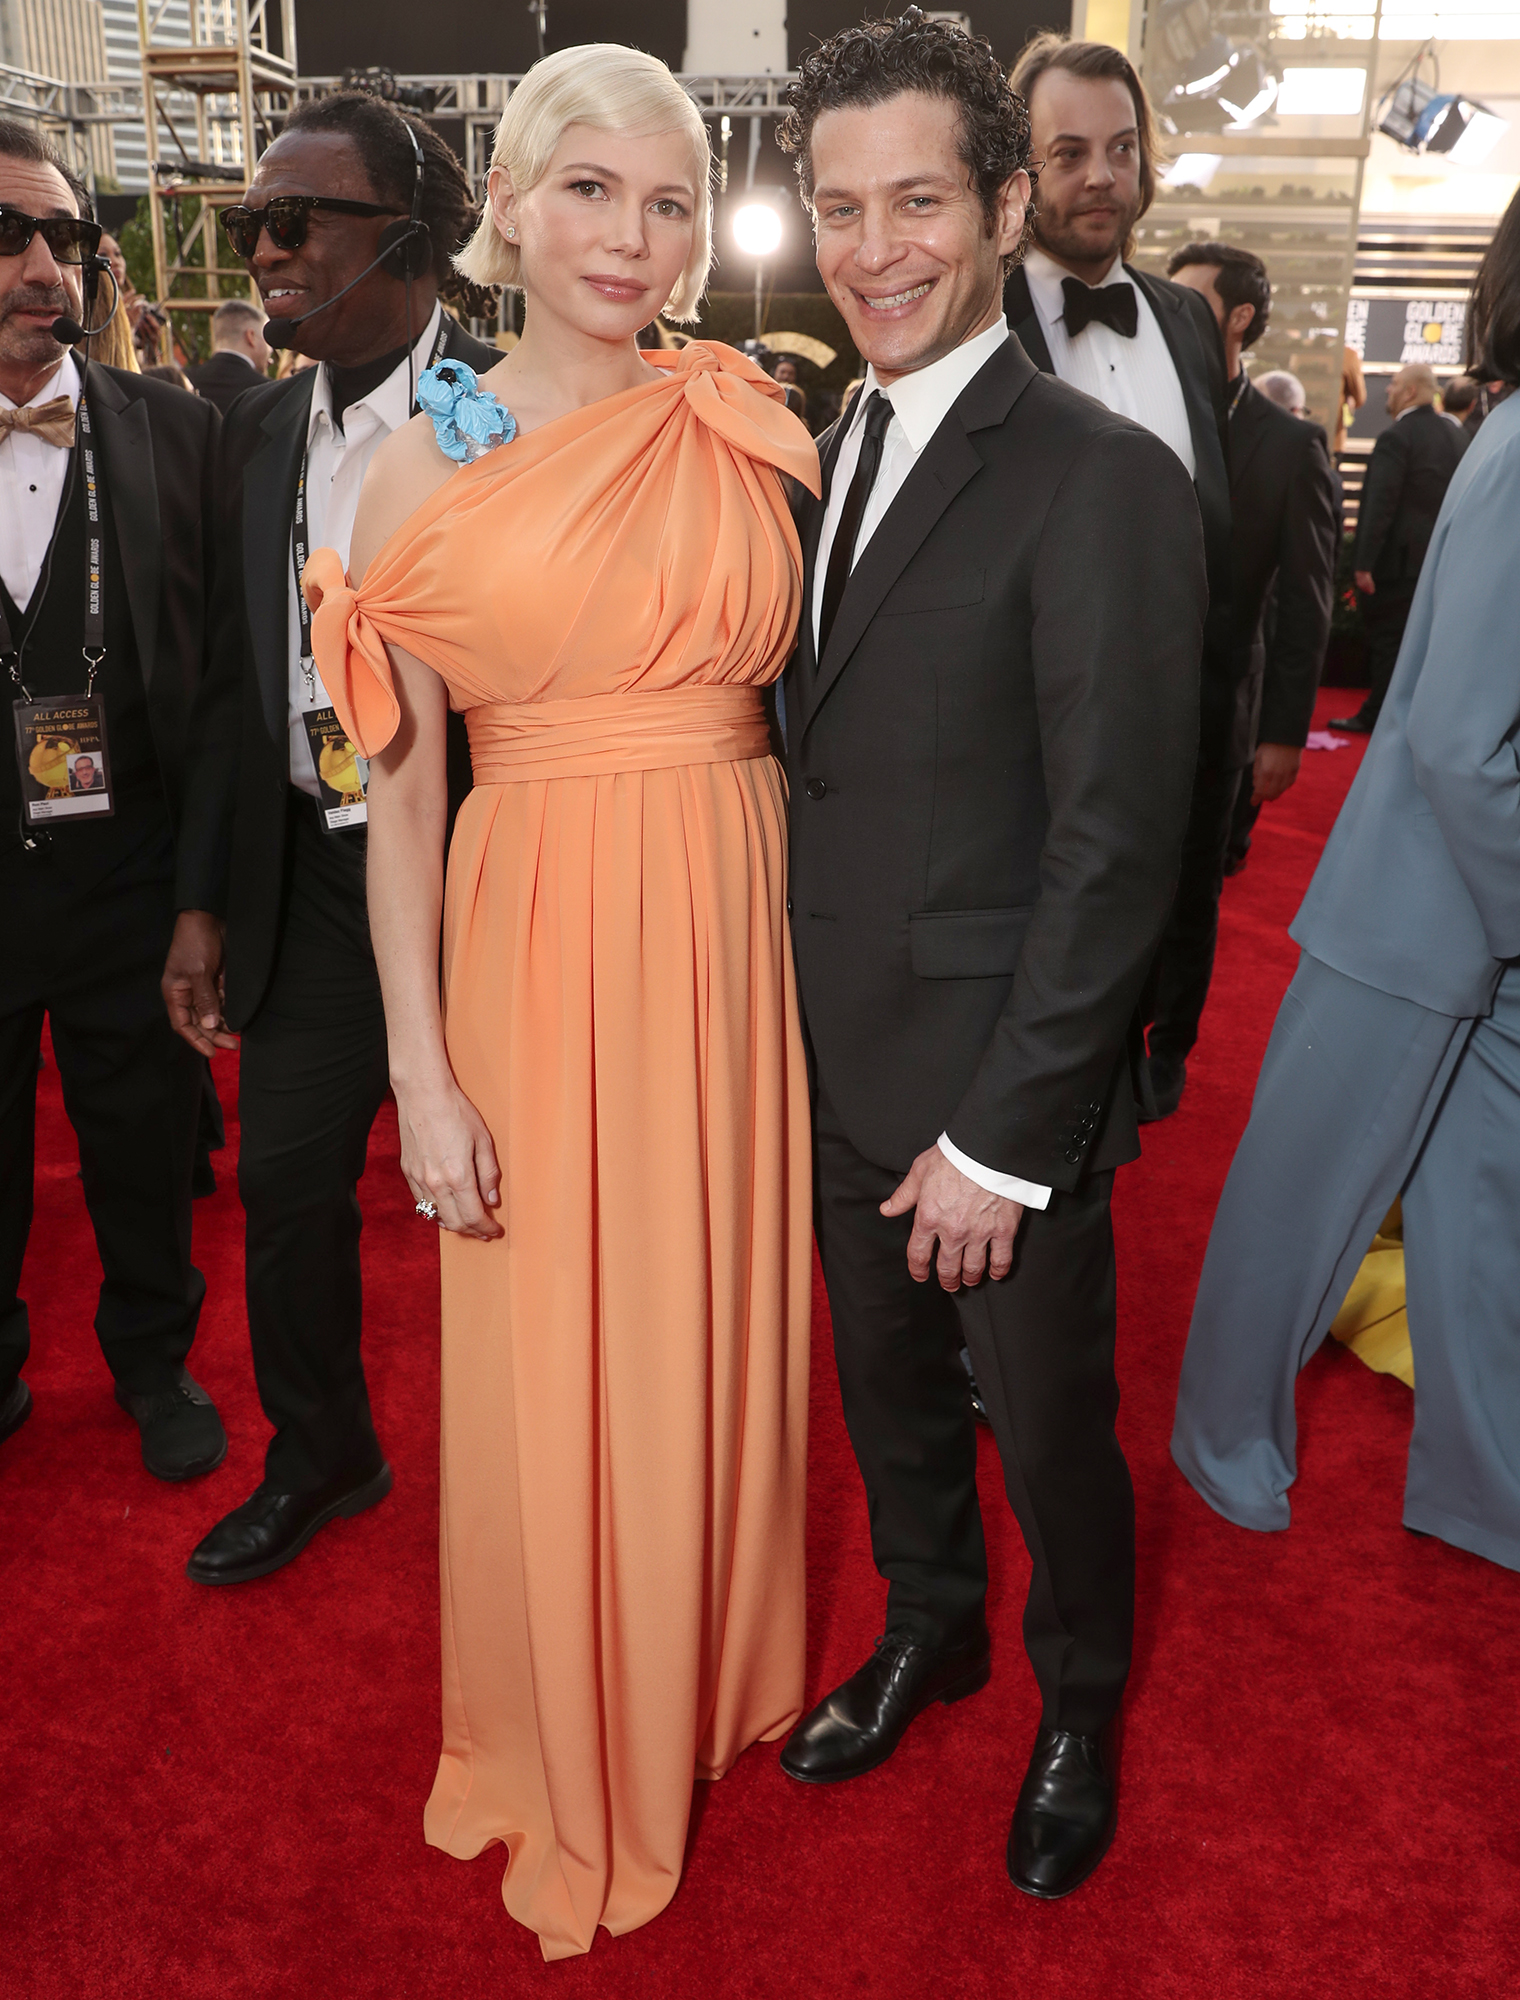 Michelle Williams and Thomas Kail on the red carpet